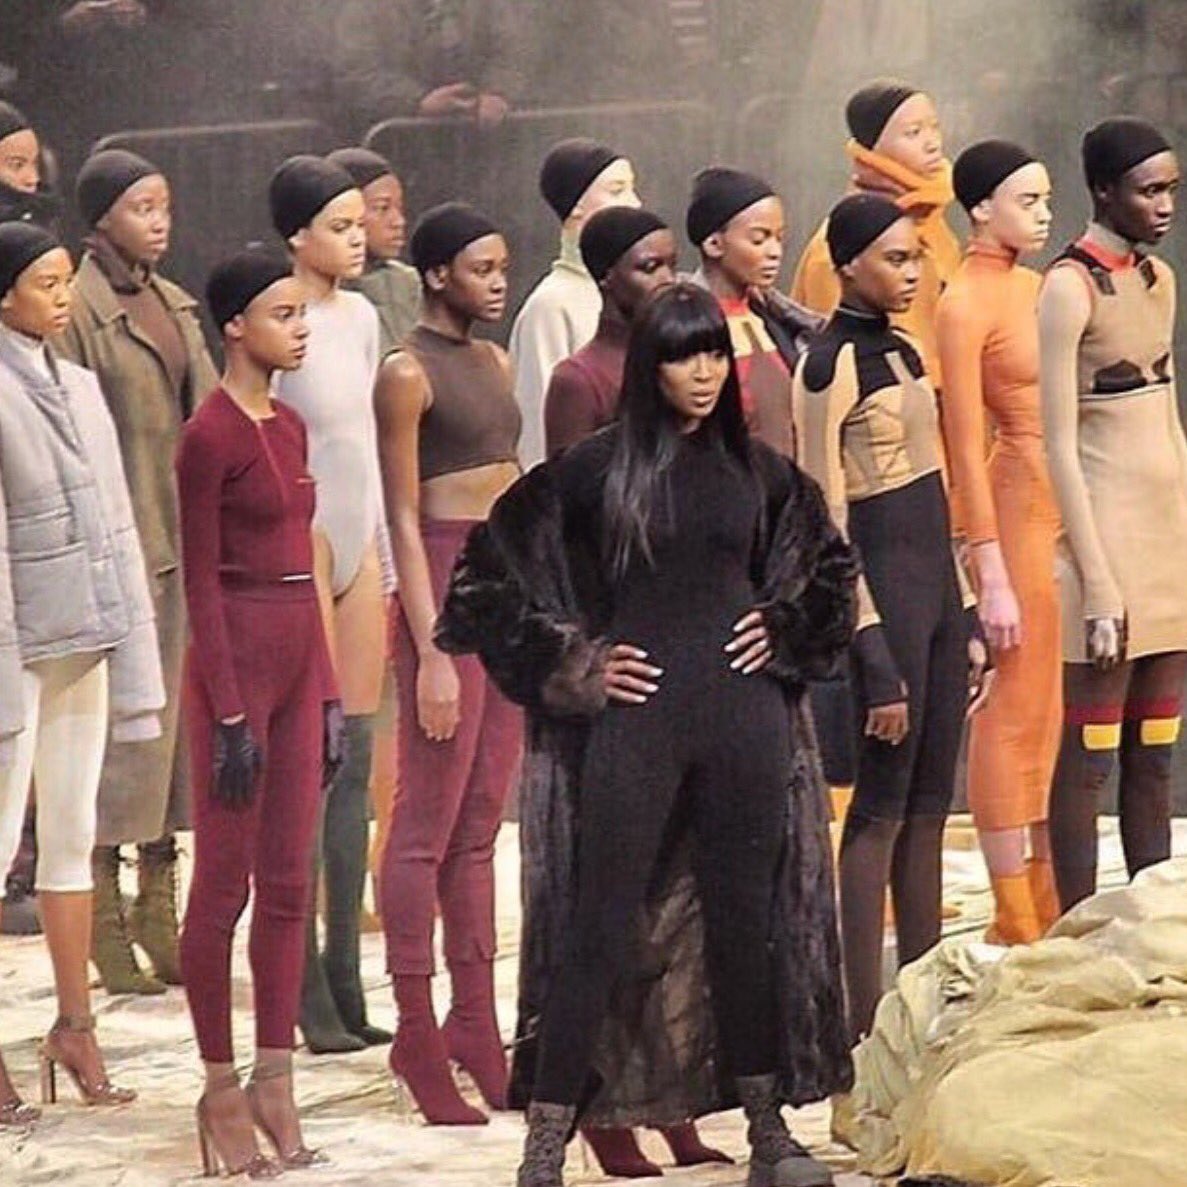 #YeezySeason3 by @kanyewest show today at #NYFW https://t.co/IN7ZFV5s4Q